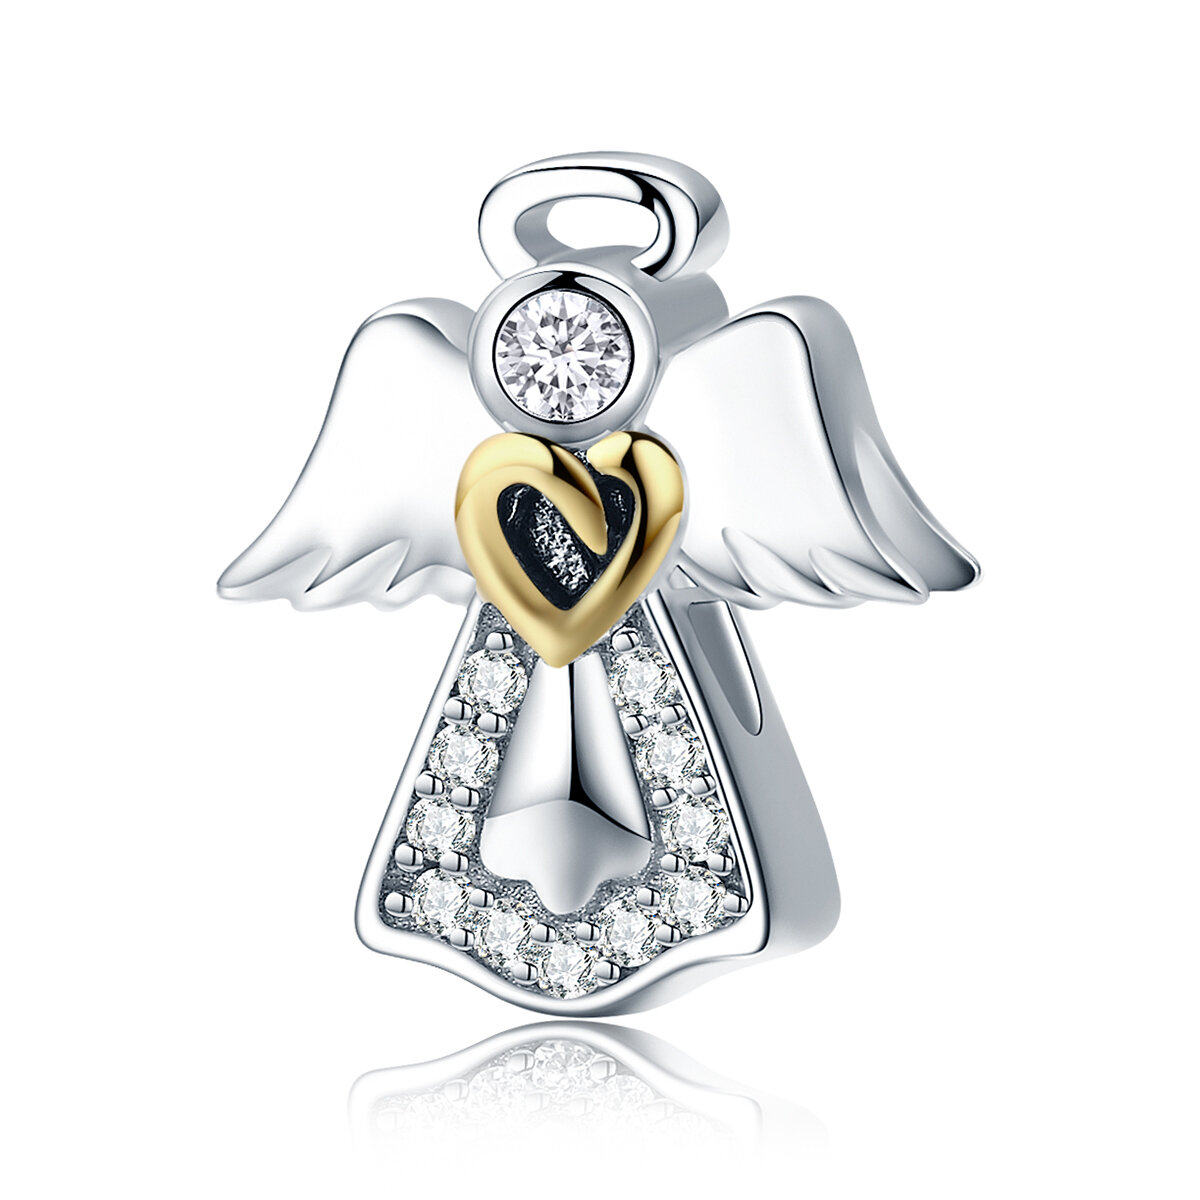 GemKing SCC747 the Guardian Angel S925 Sterling Silver Charm